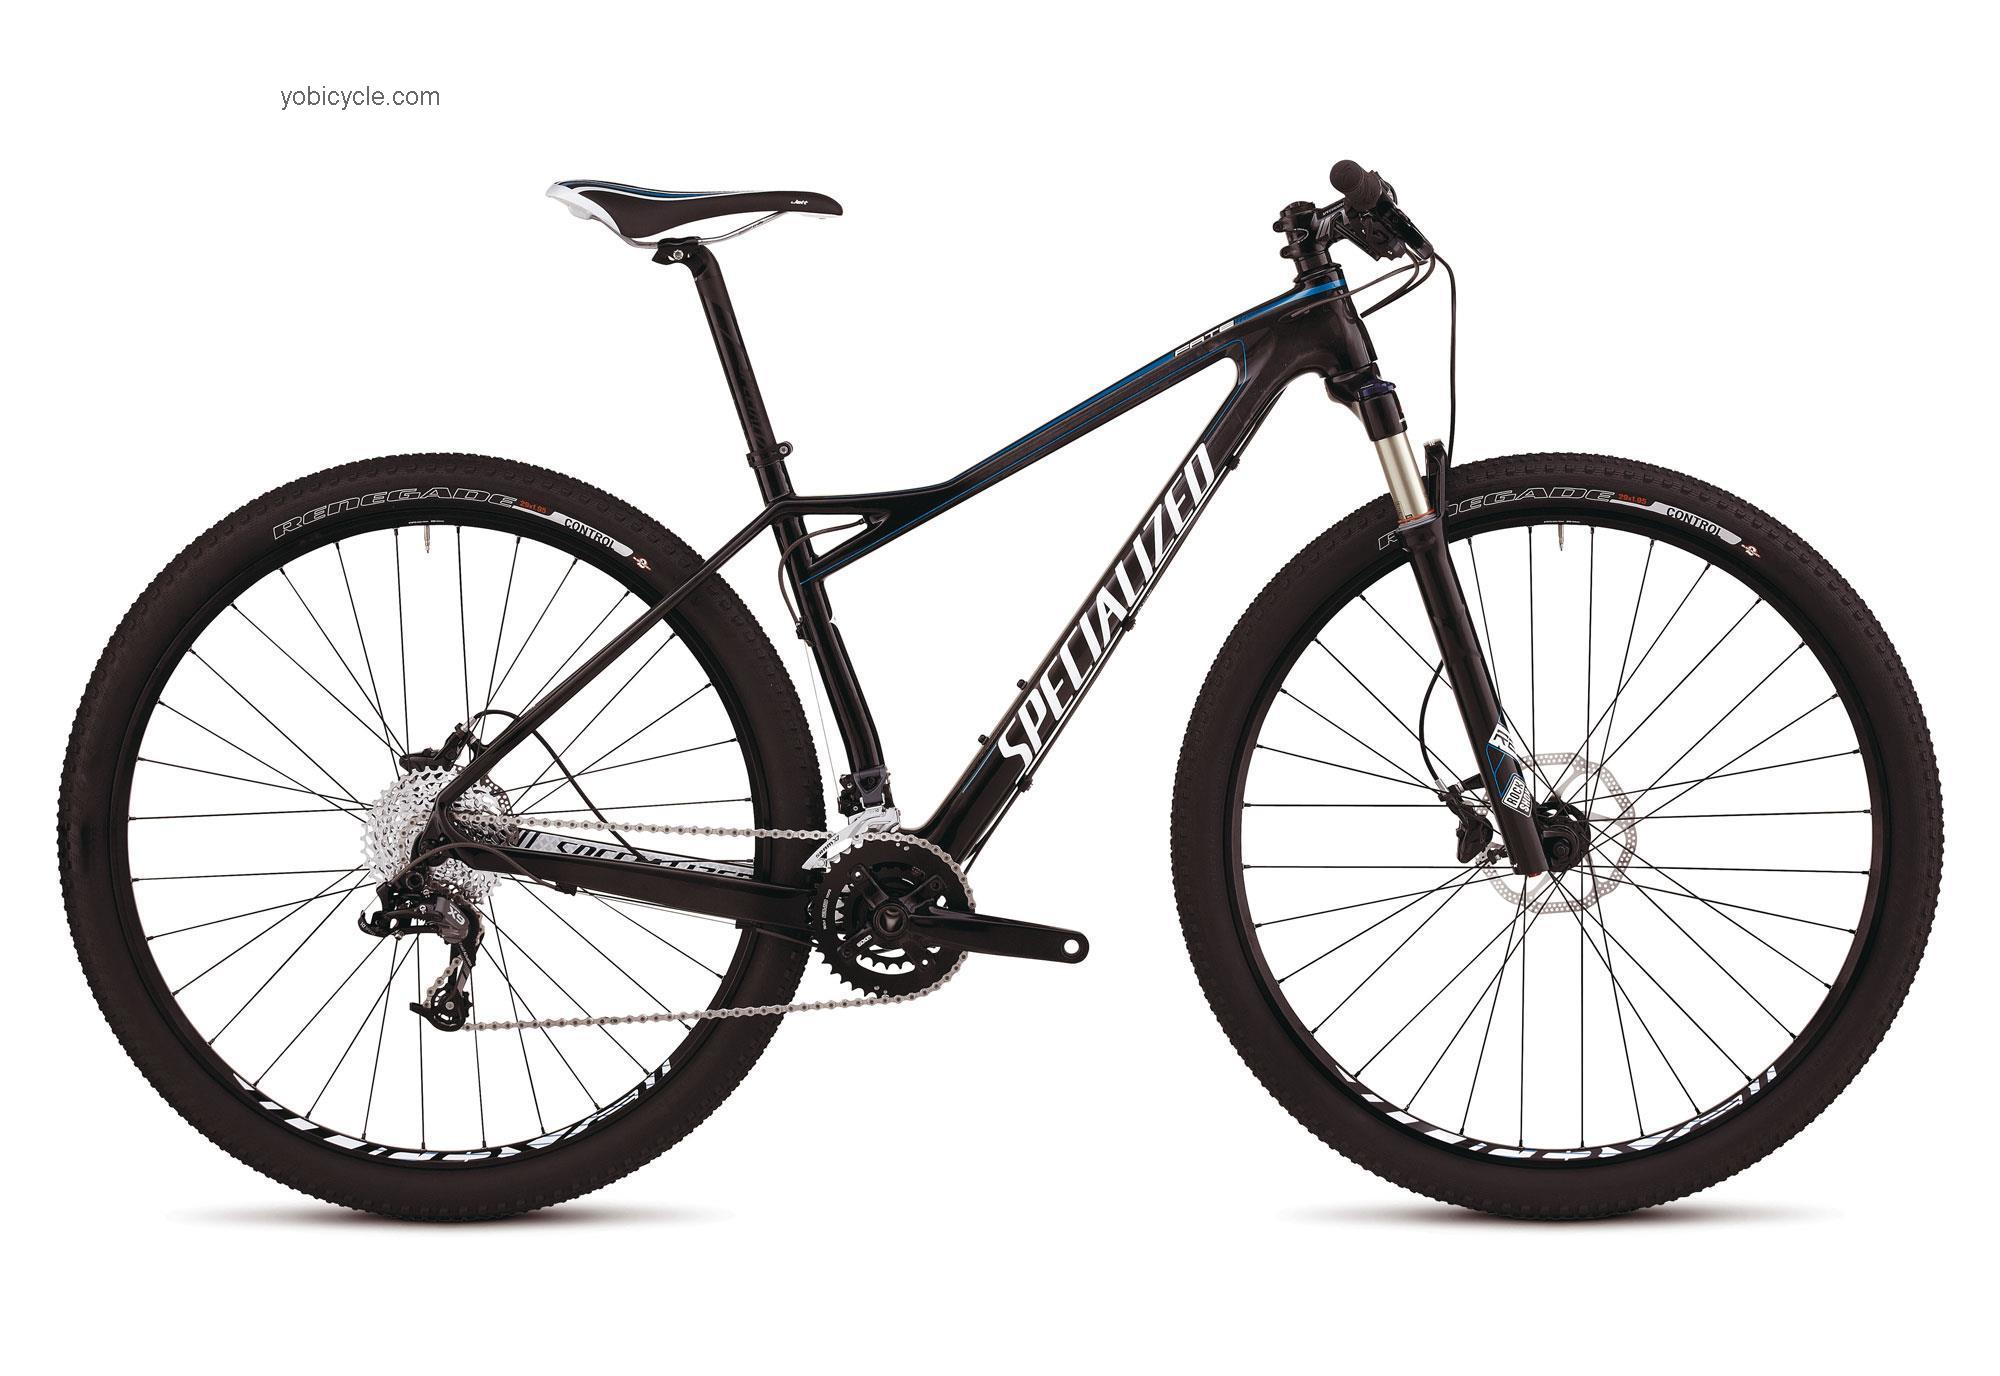 Specialized Fate Comp Carbon 29 2012 comparison online with competitors